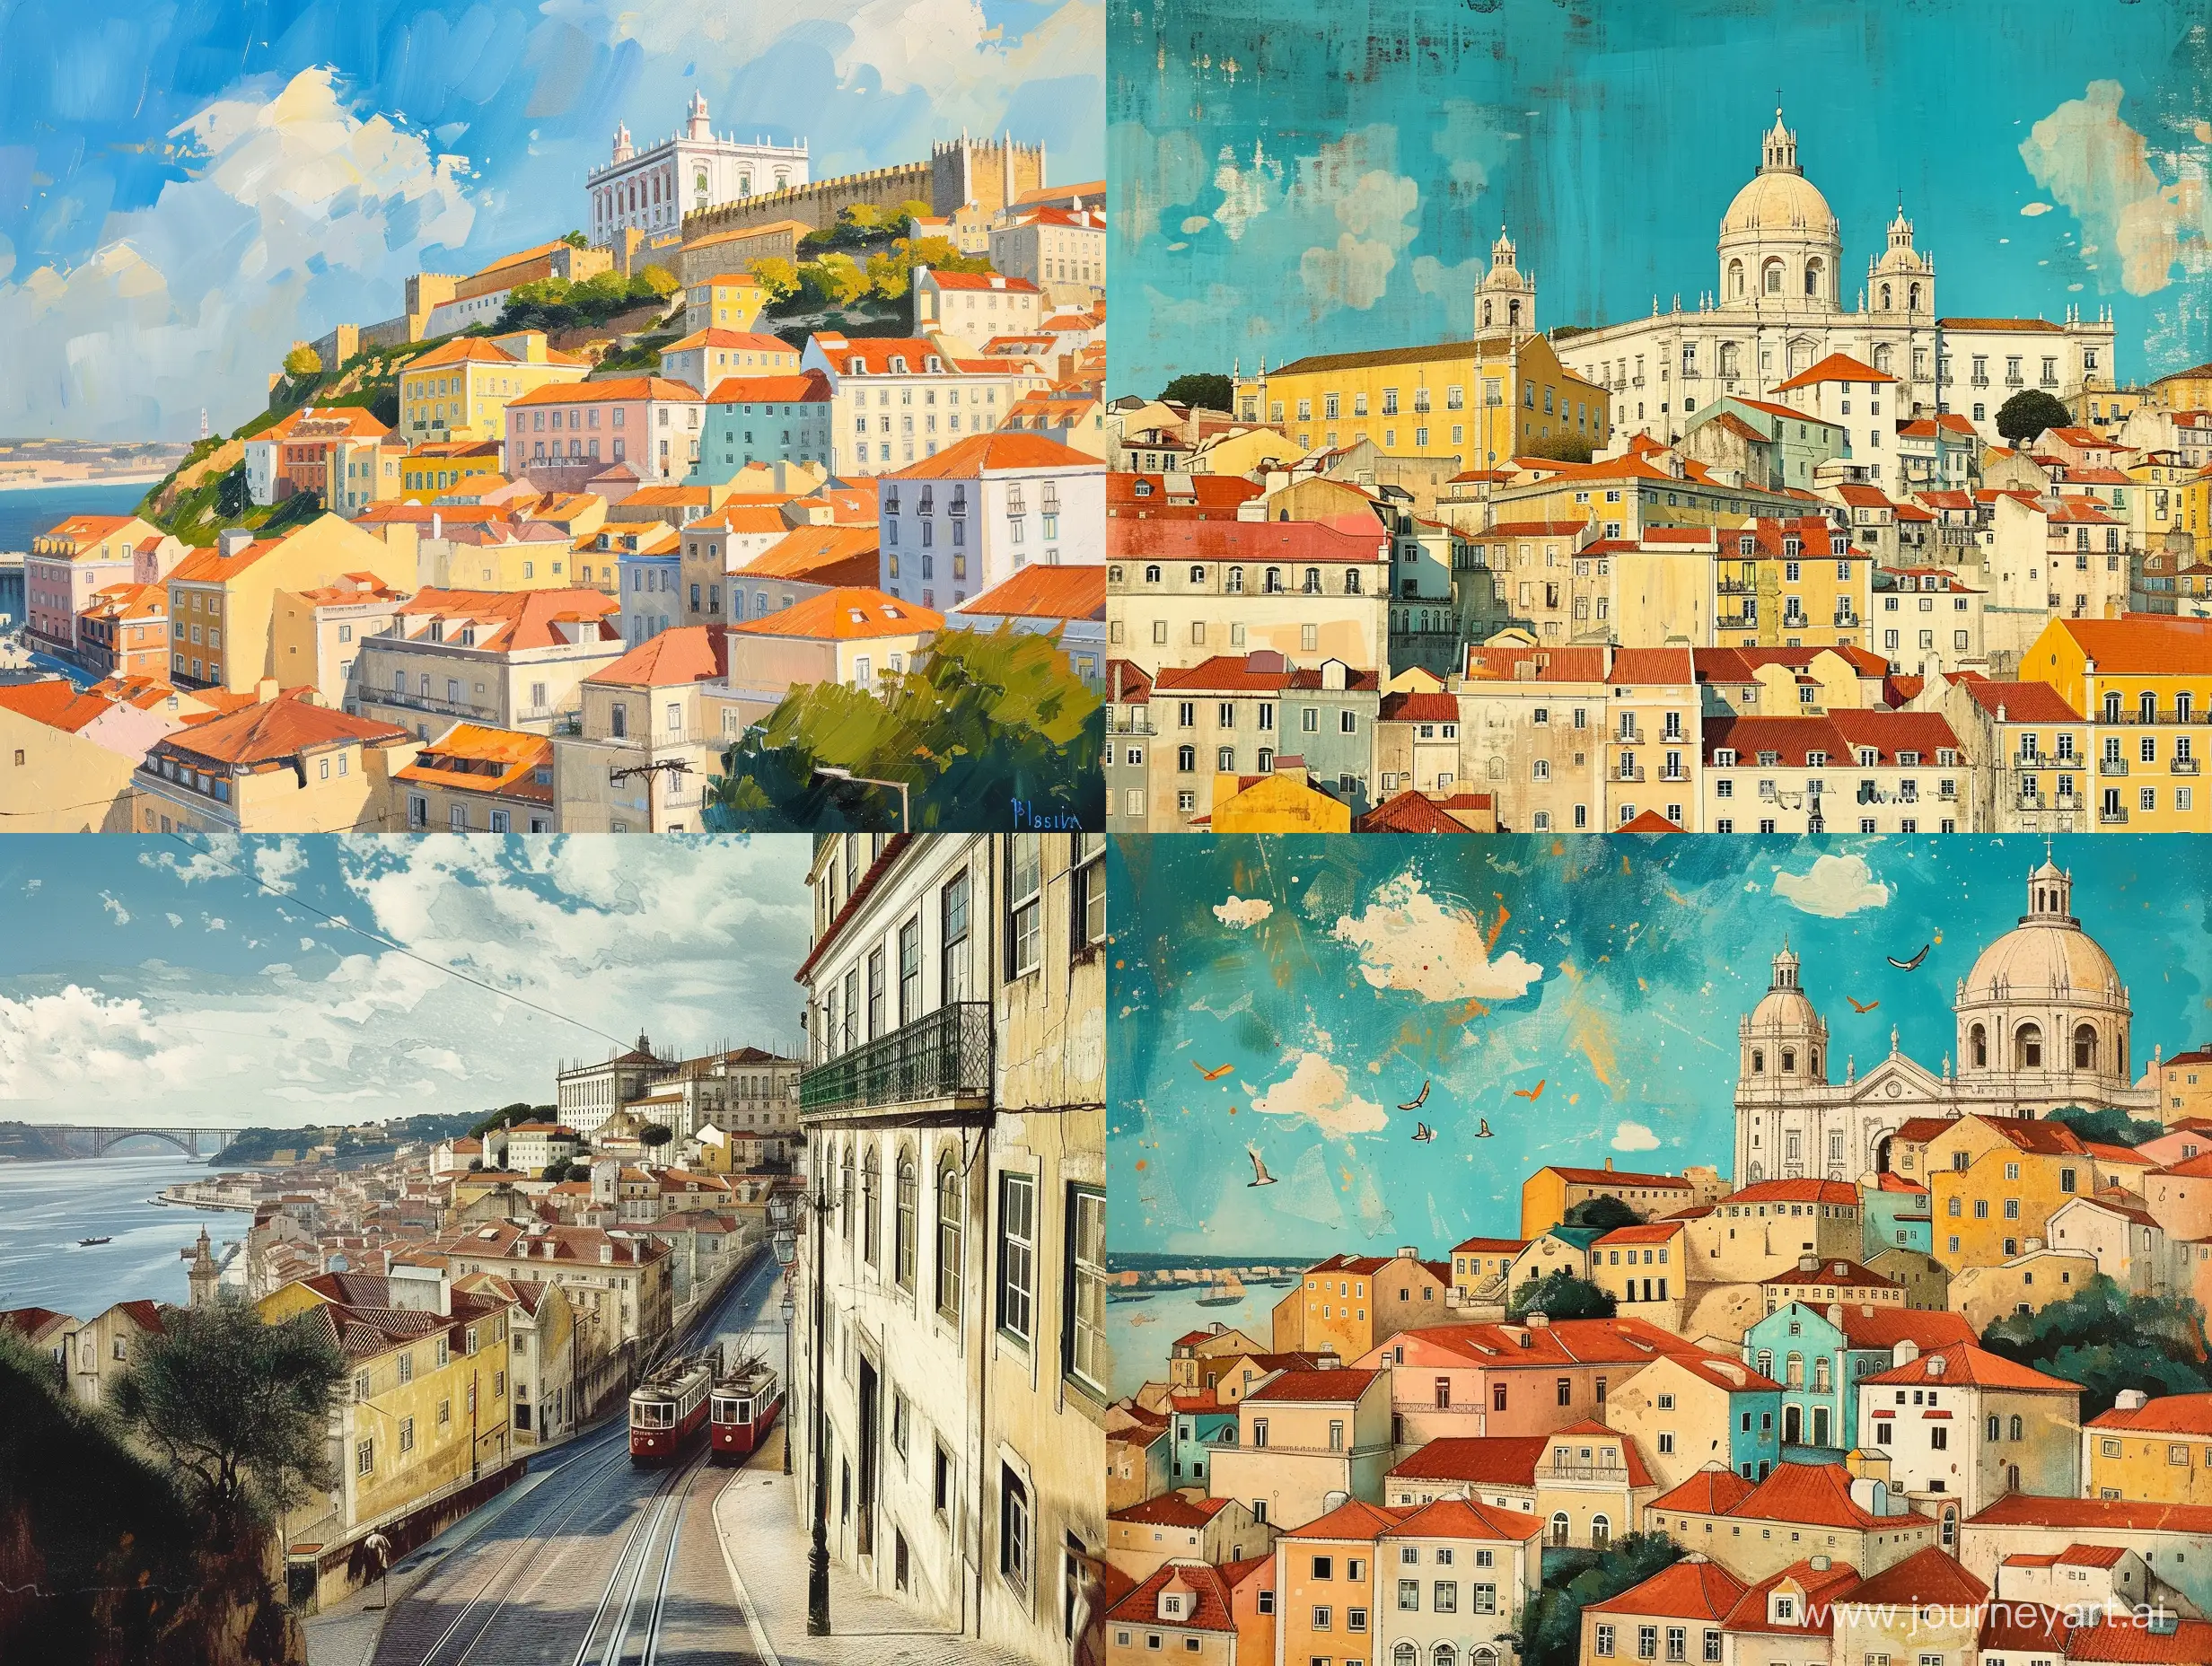 The city of Lisbon, an illustration for a vintage magazine in oil paints